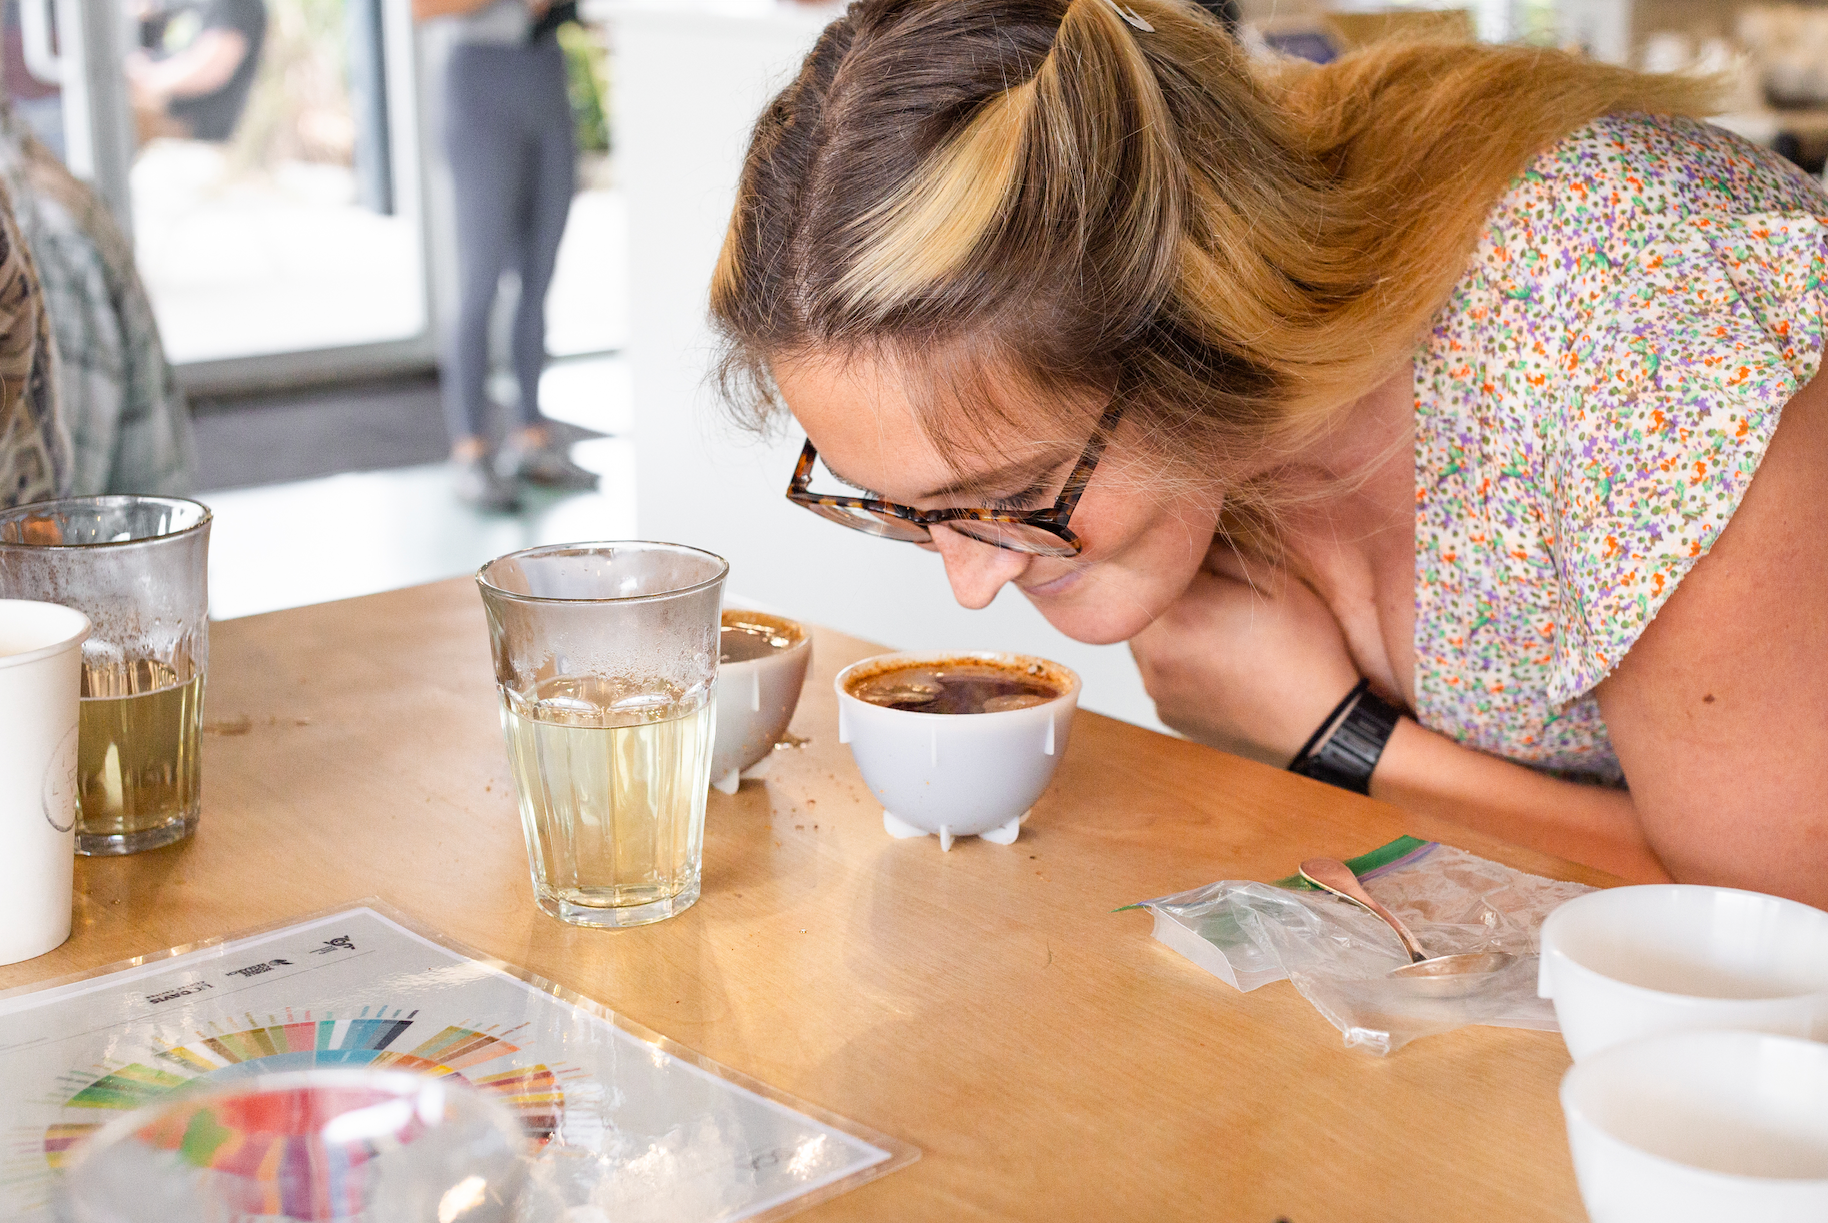 Woman leaning forward to smell a cup of coffee set on a table.